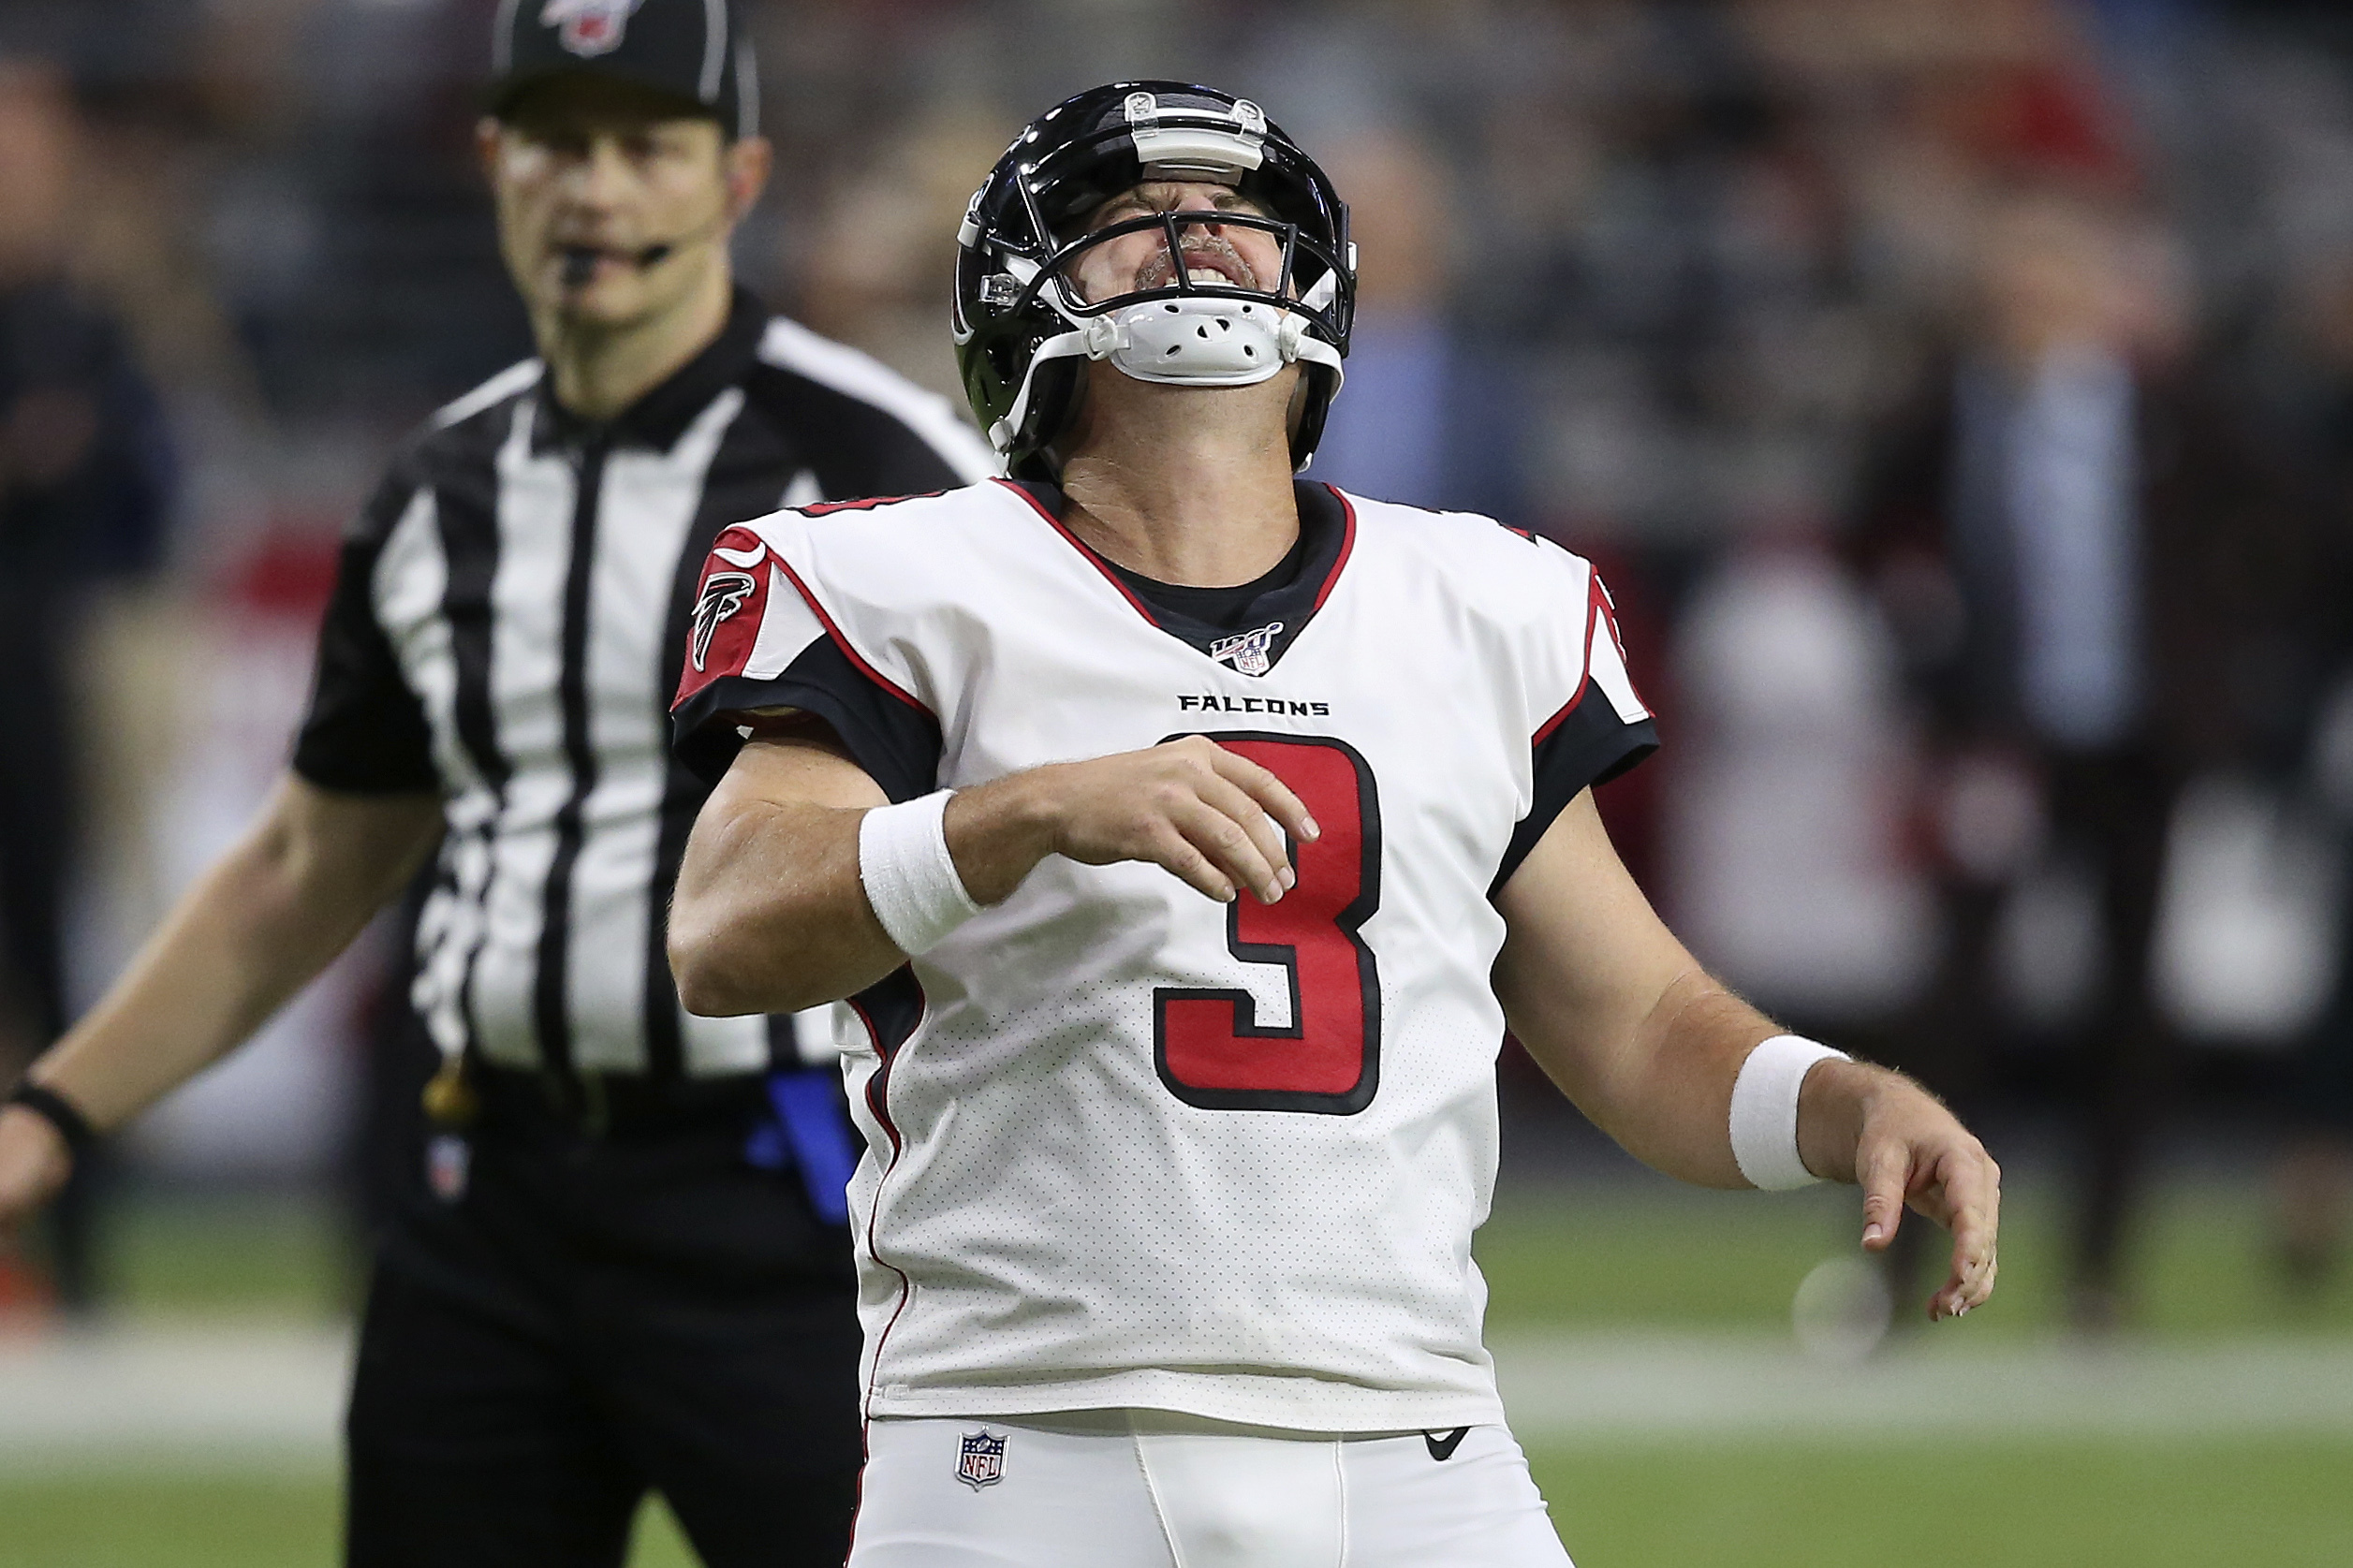 Missed PAT sends Falcons home empty from long trip